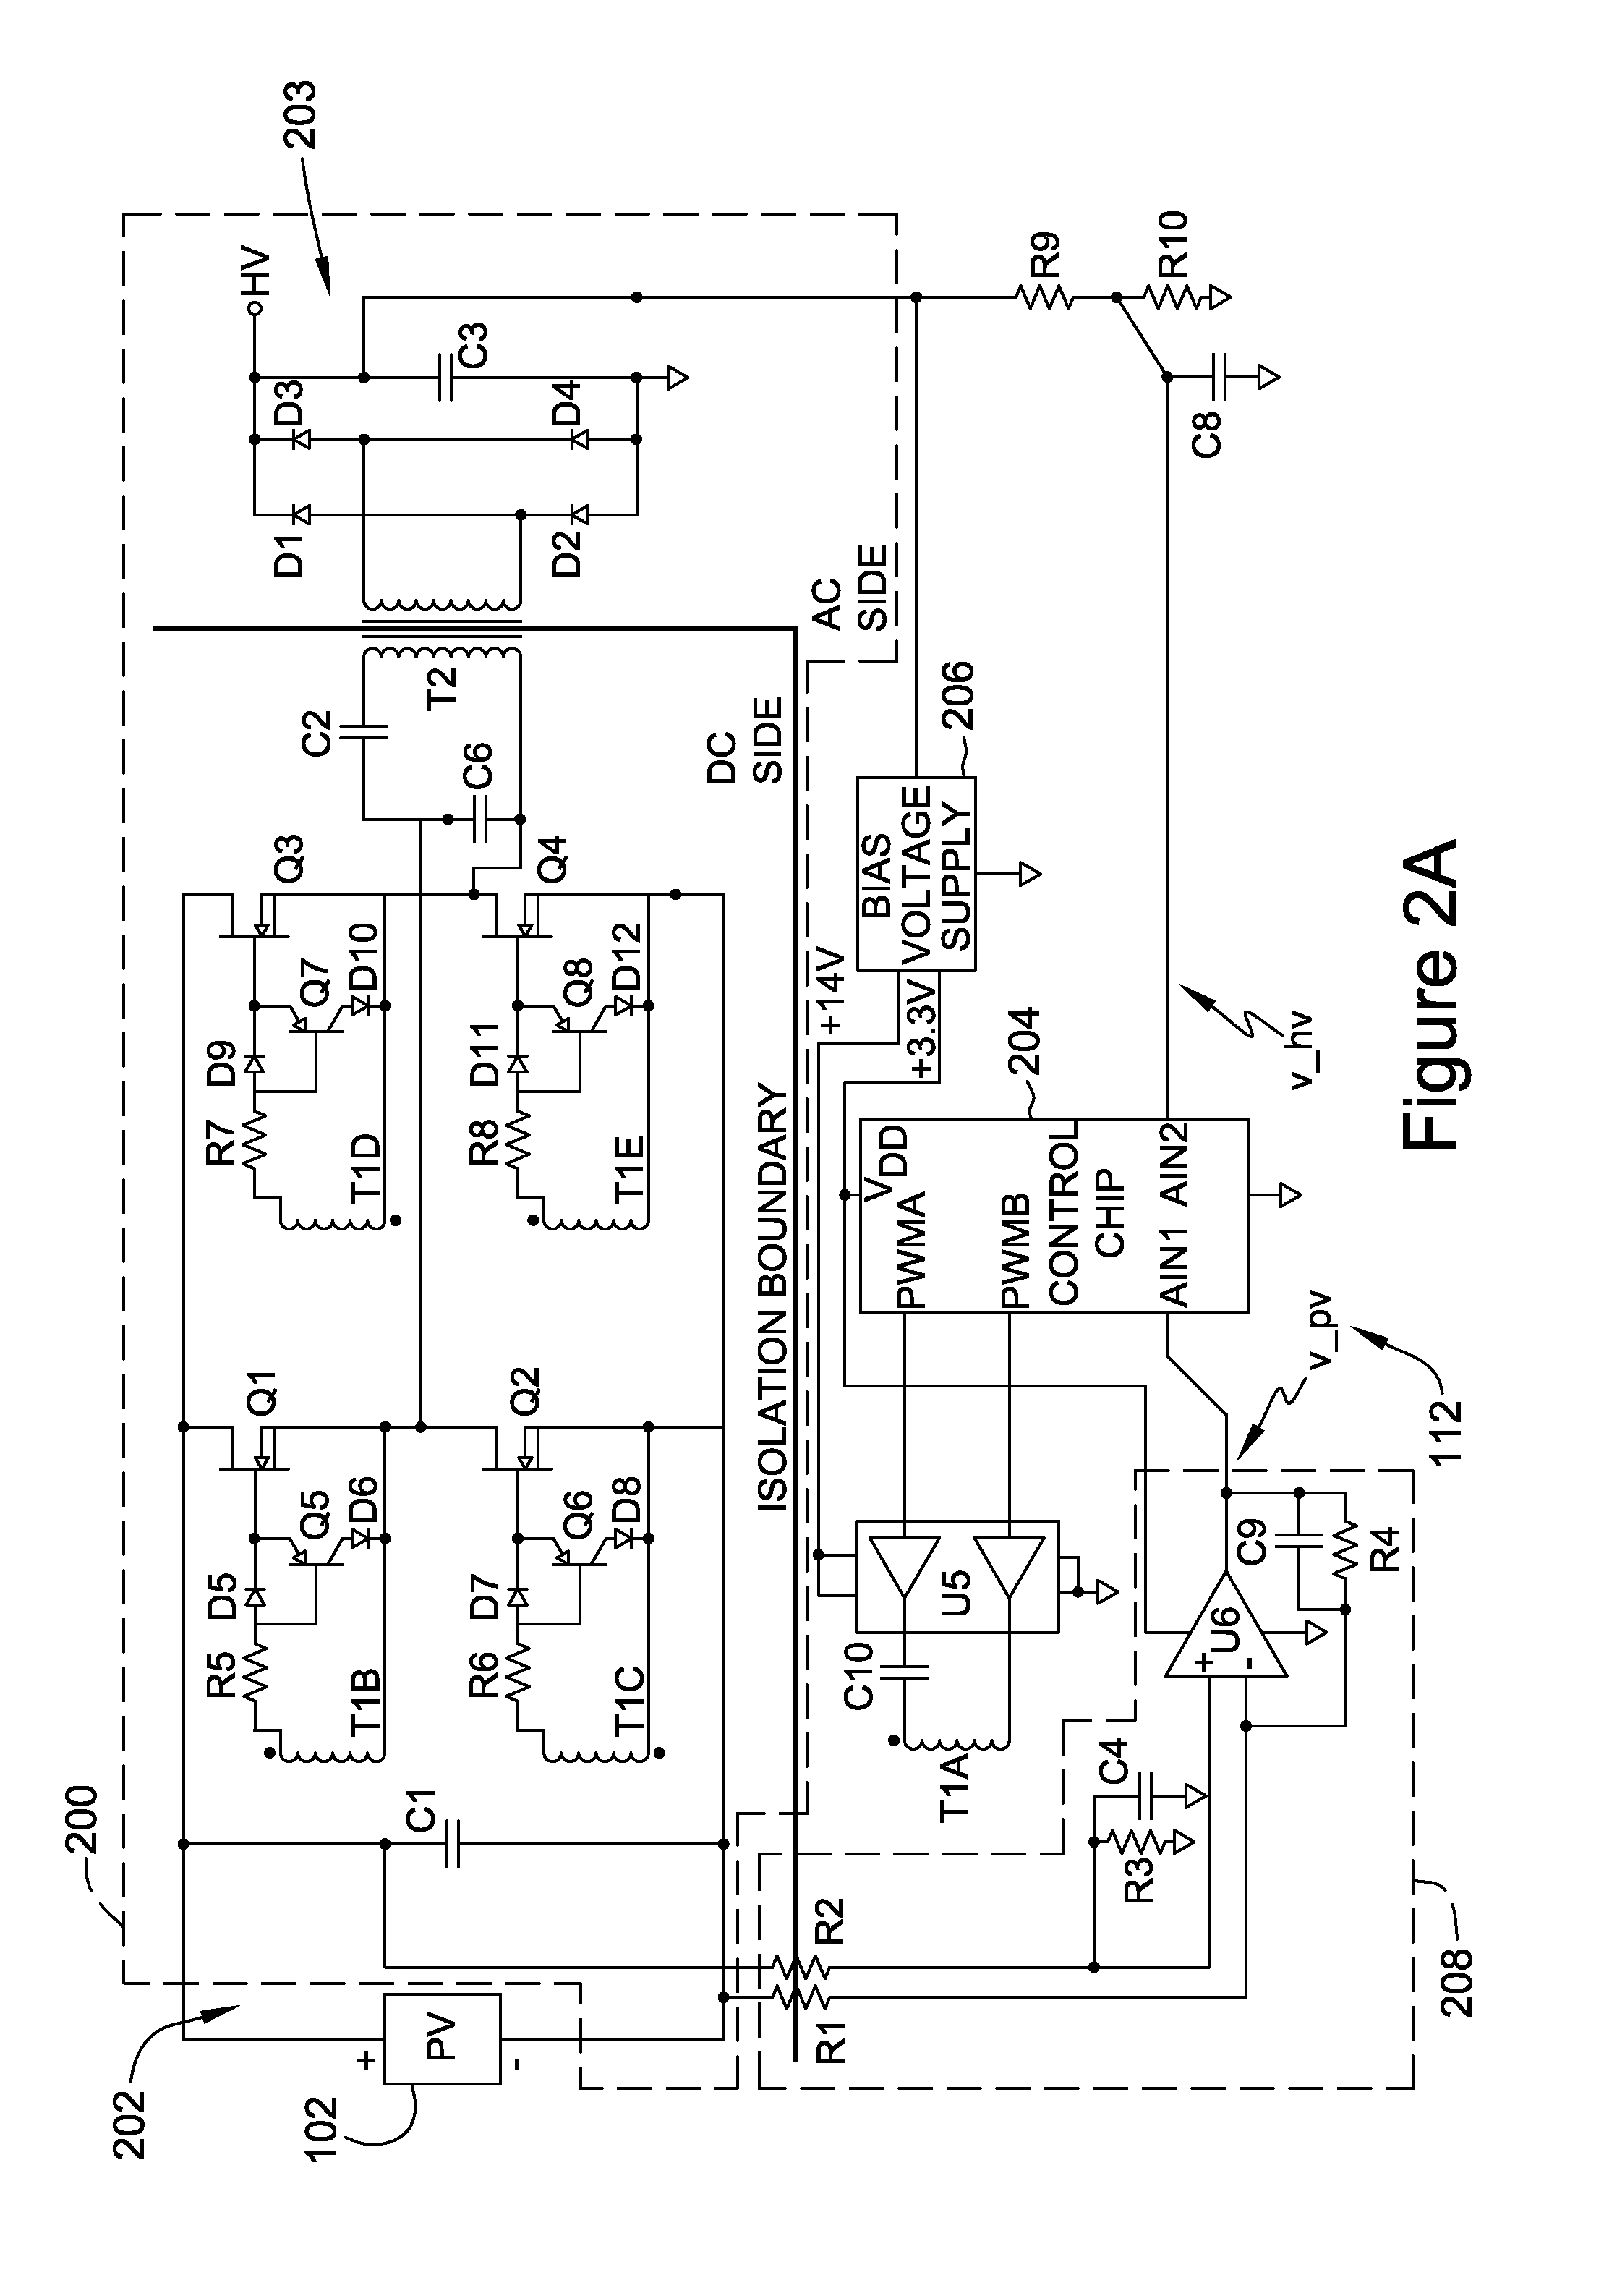 Power converters including llc converters and methods of controlling the same